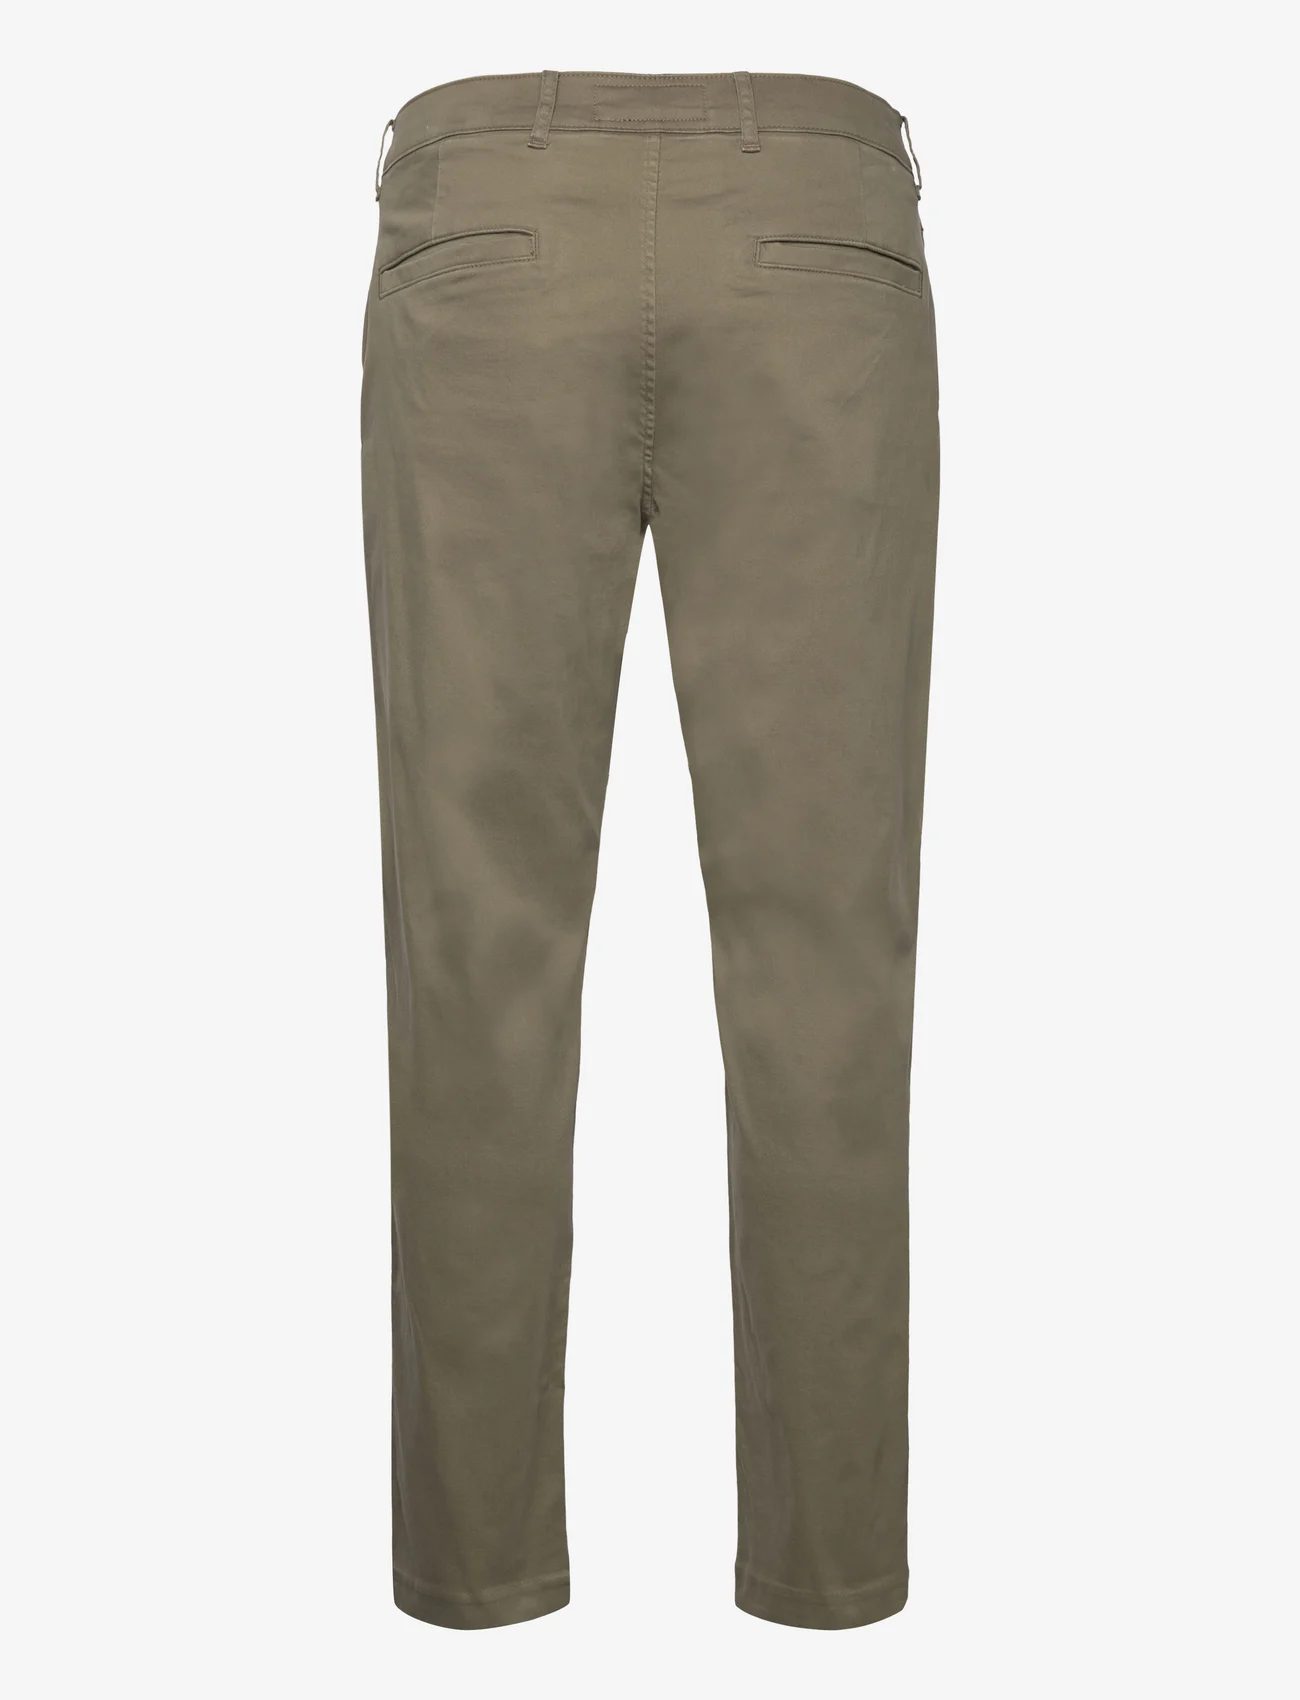 Abercrombie & Fitch - ANF MENS PANTS - chino's - grape leaf - 1